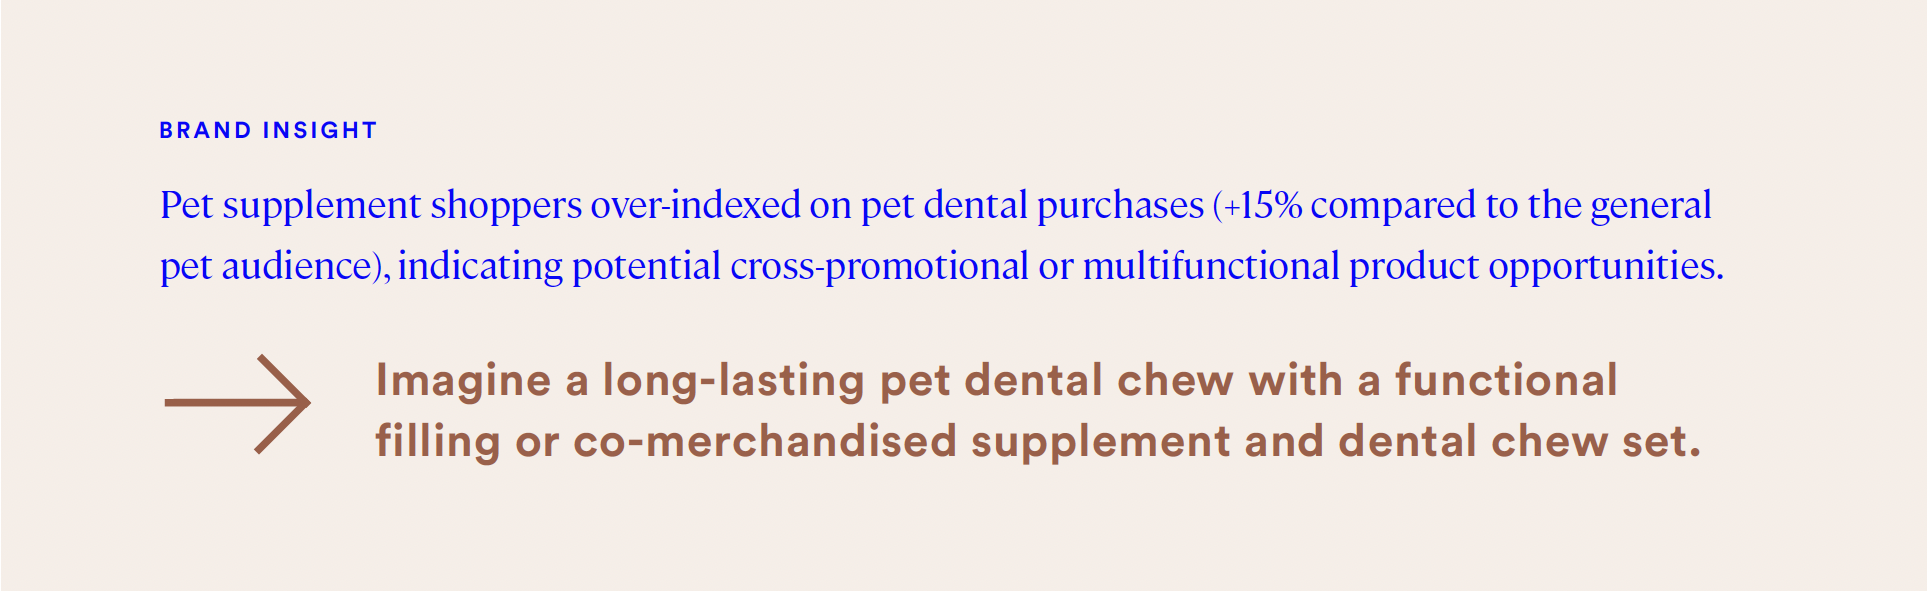 brand_insights_pet_nutrition_products_supplements_dental